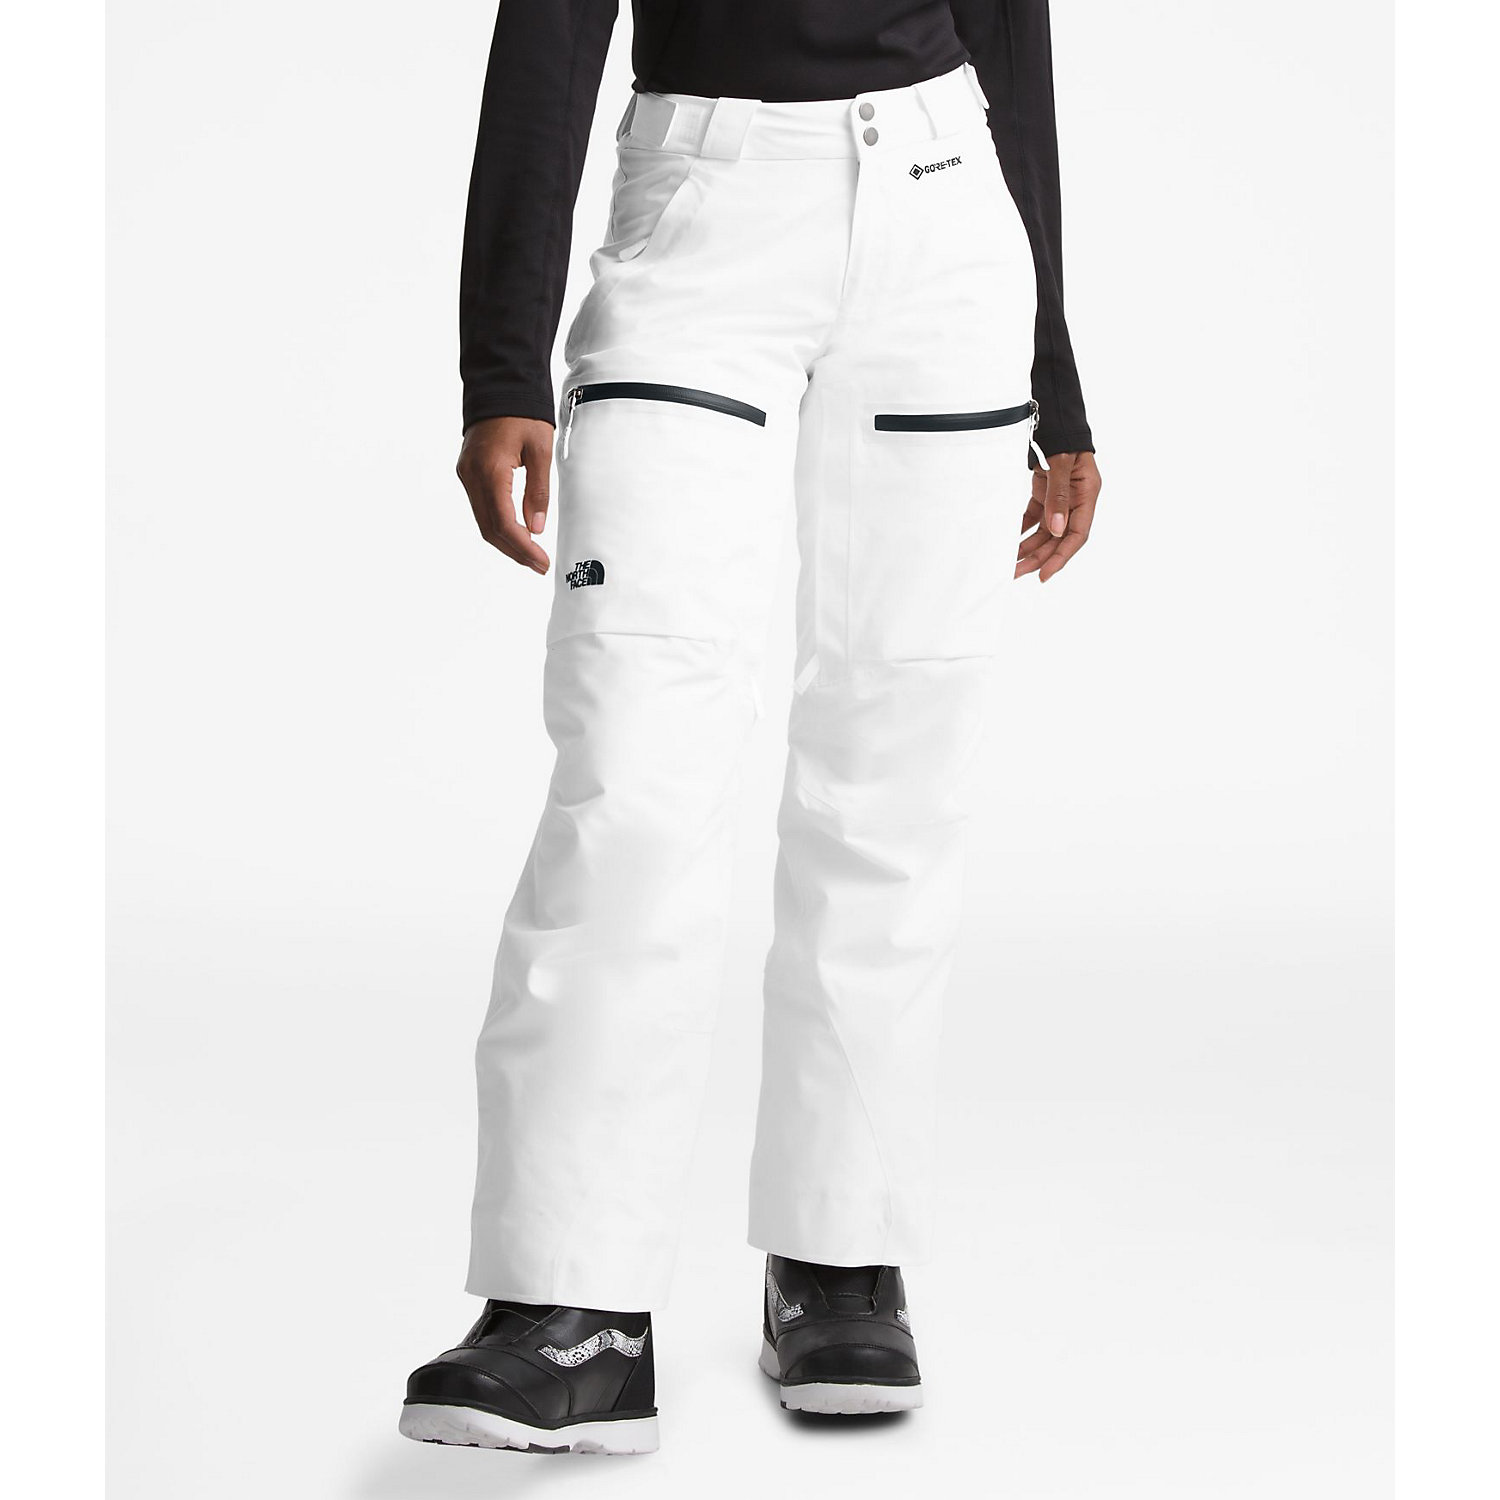 The North Face Women's Lostrail Pant - Large Regular, TNF White